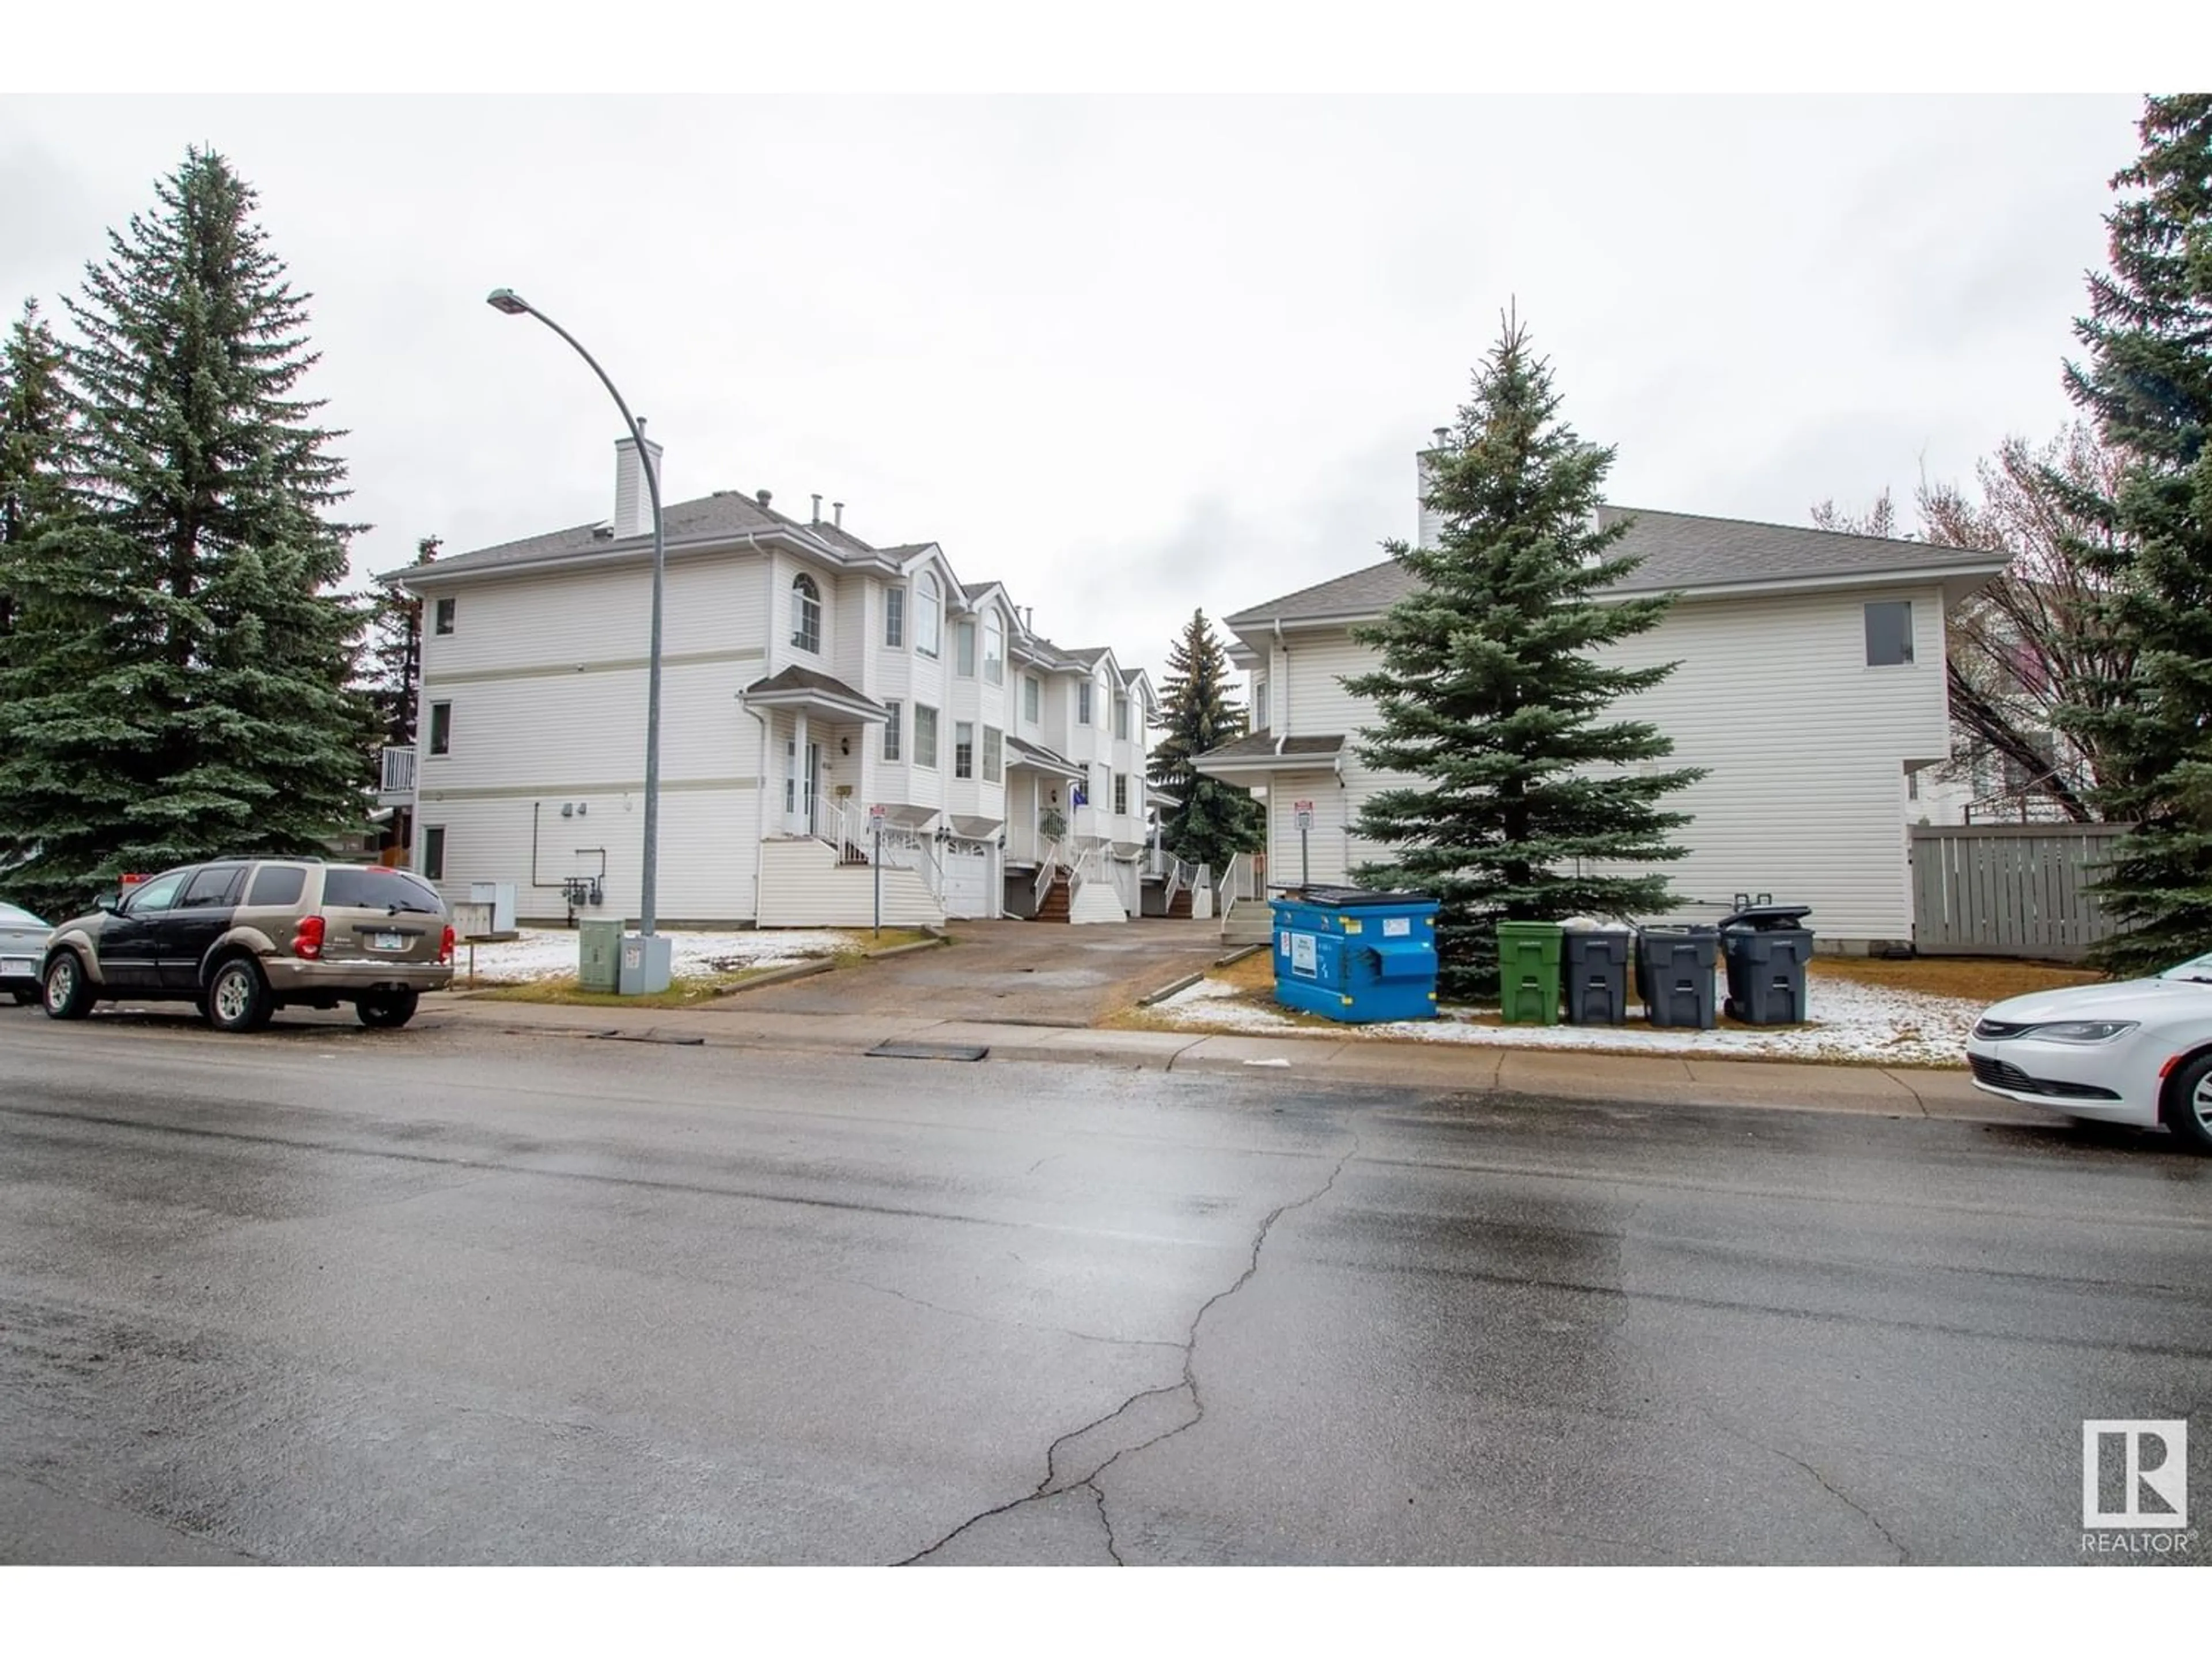 A pic from exterior of the house or condo for 4265 29 AV NW, Edmonton Alberta T6L6W5